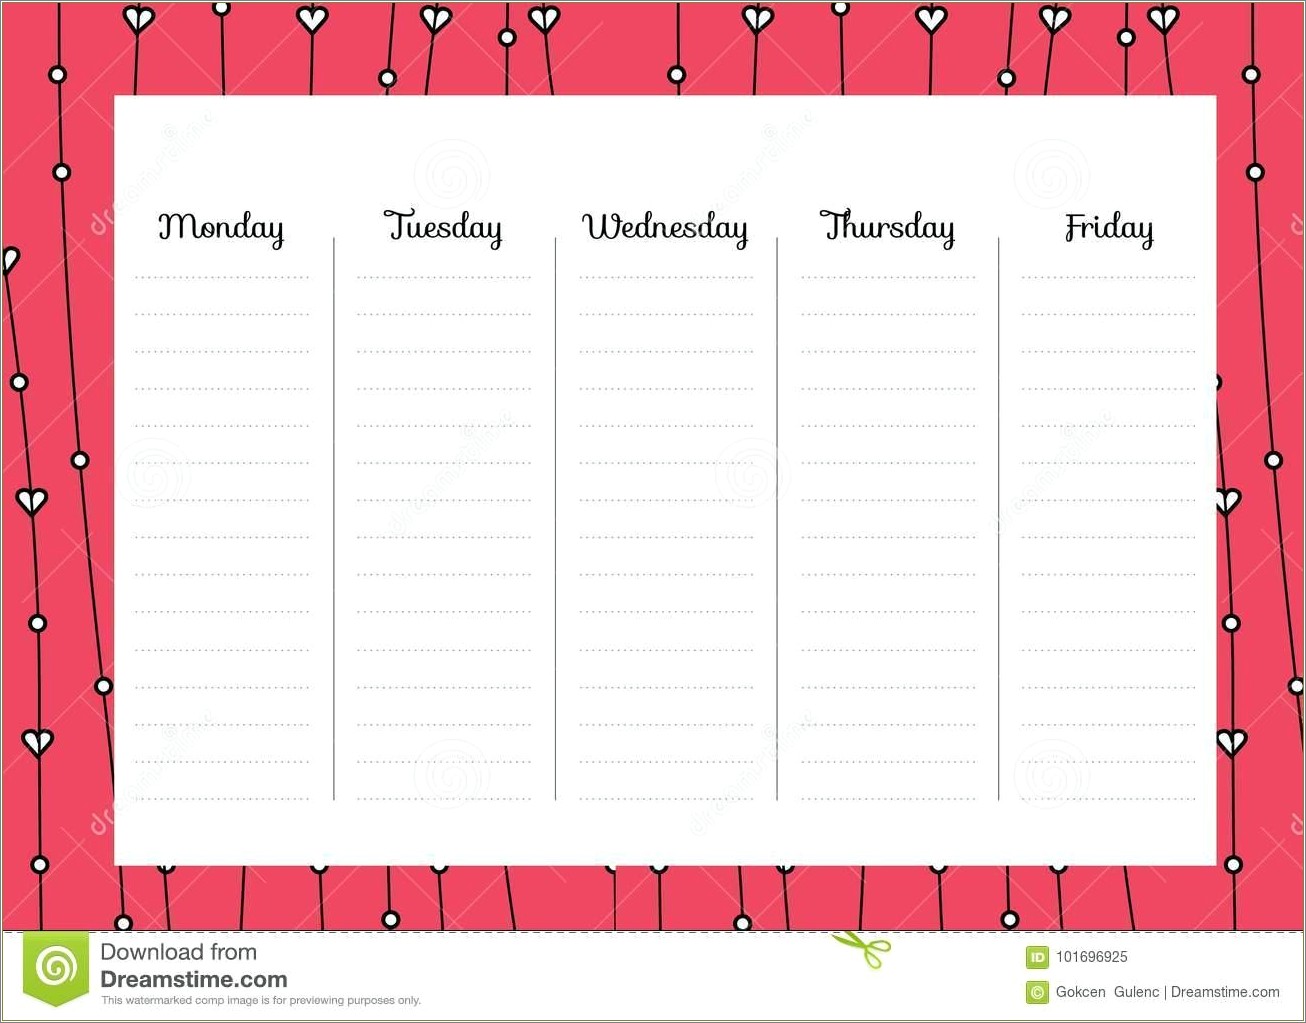 Free Monday To Friday Calendar Template